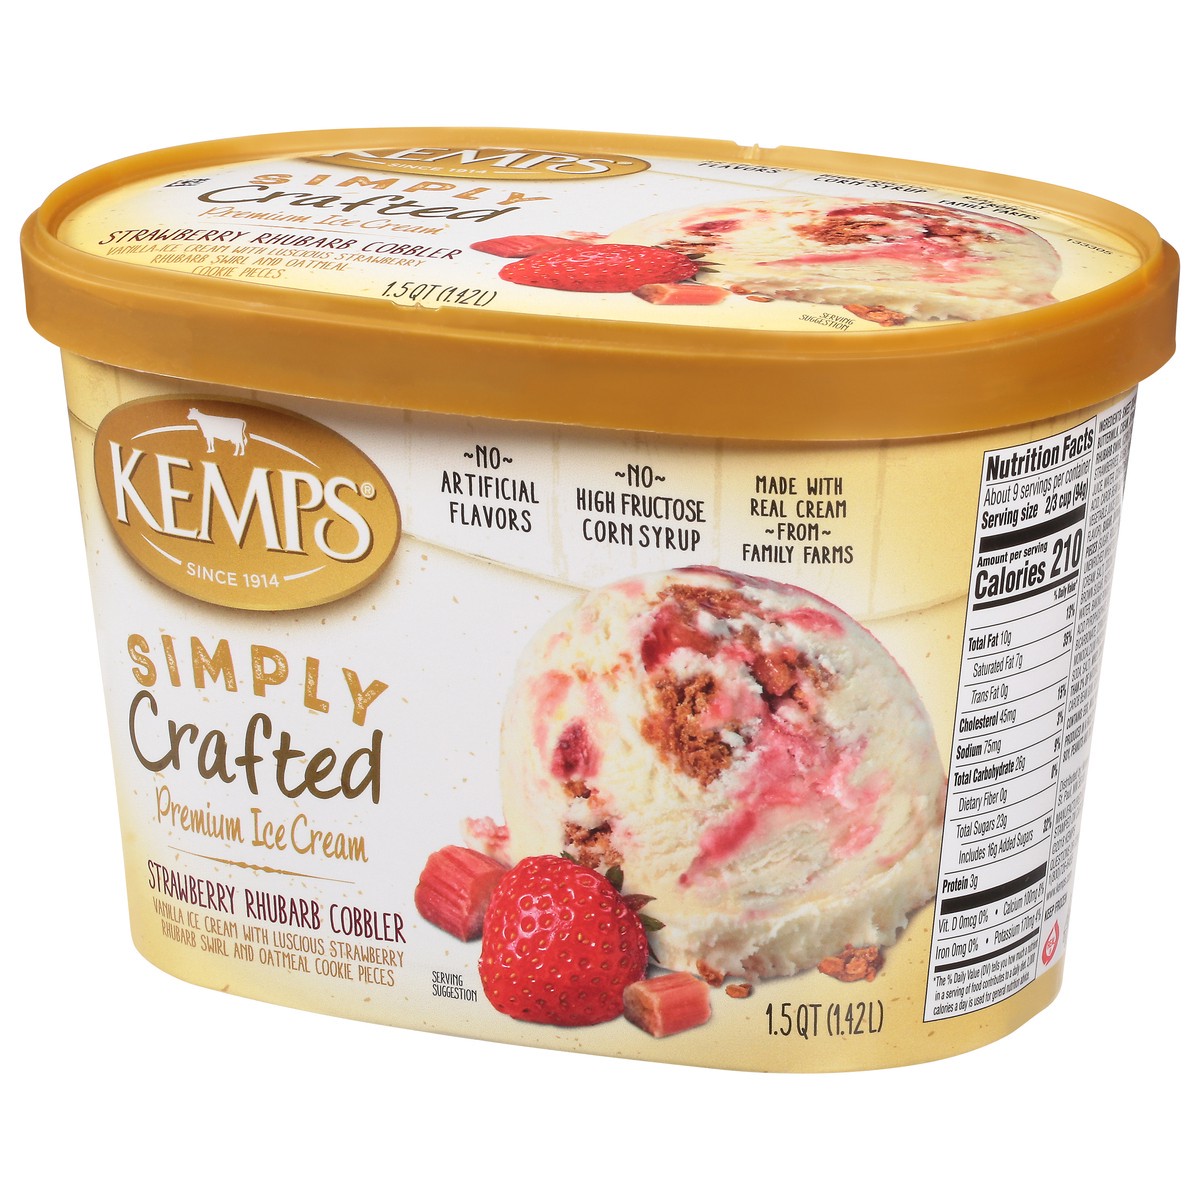 slide 12 of 14, Kemps Simply Crafted Premium Strawberry Rhubarb Cobbler Ice Cream 1.5 qt, 48 oz